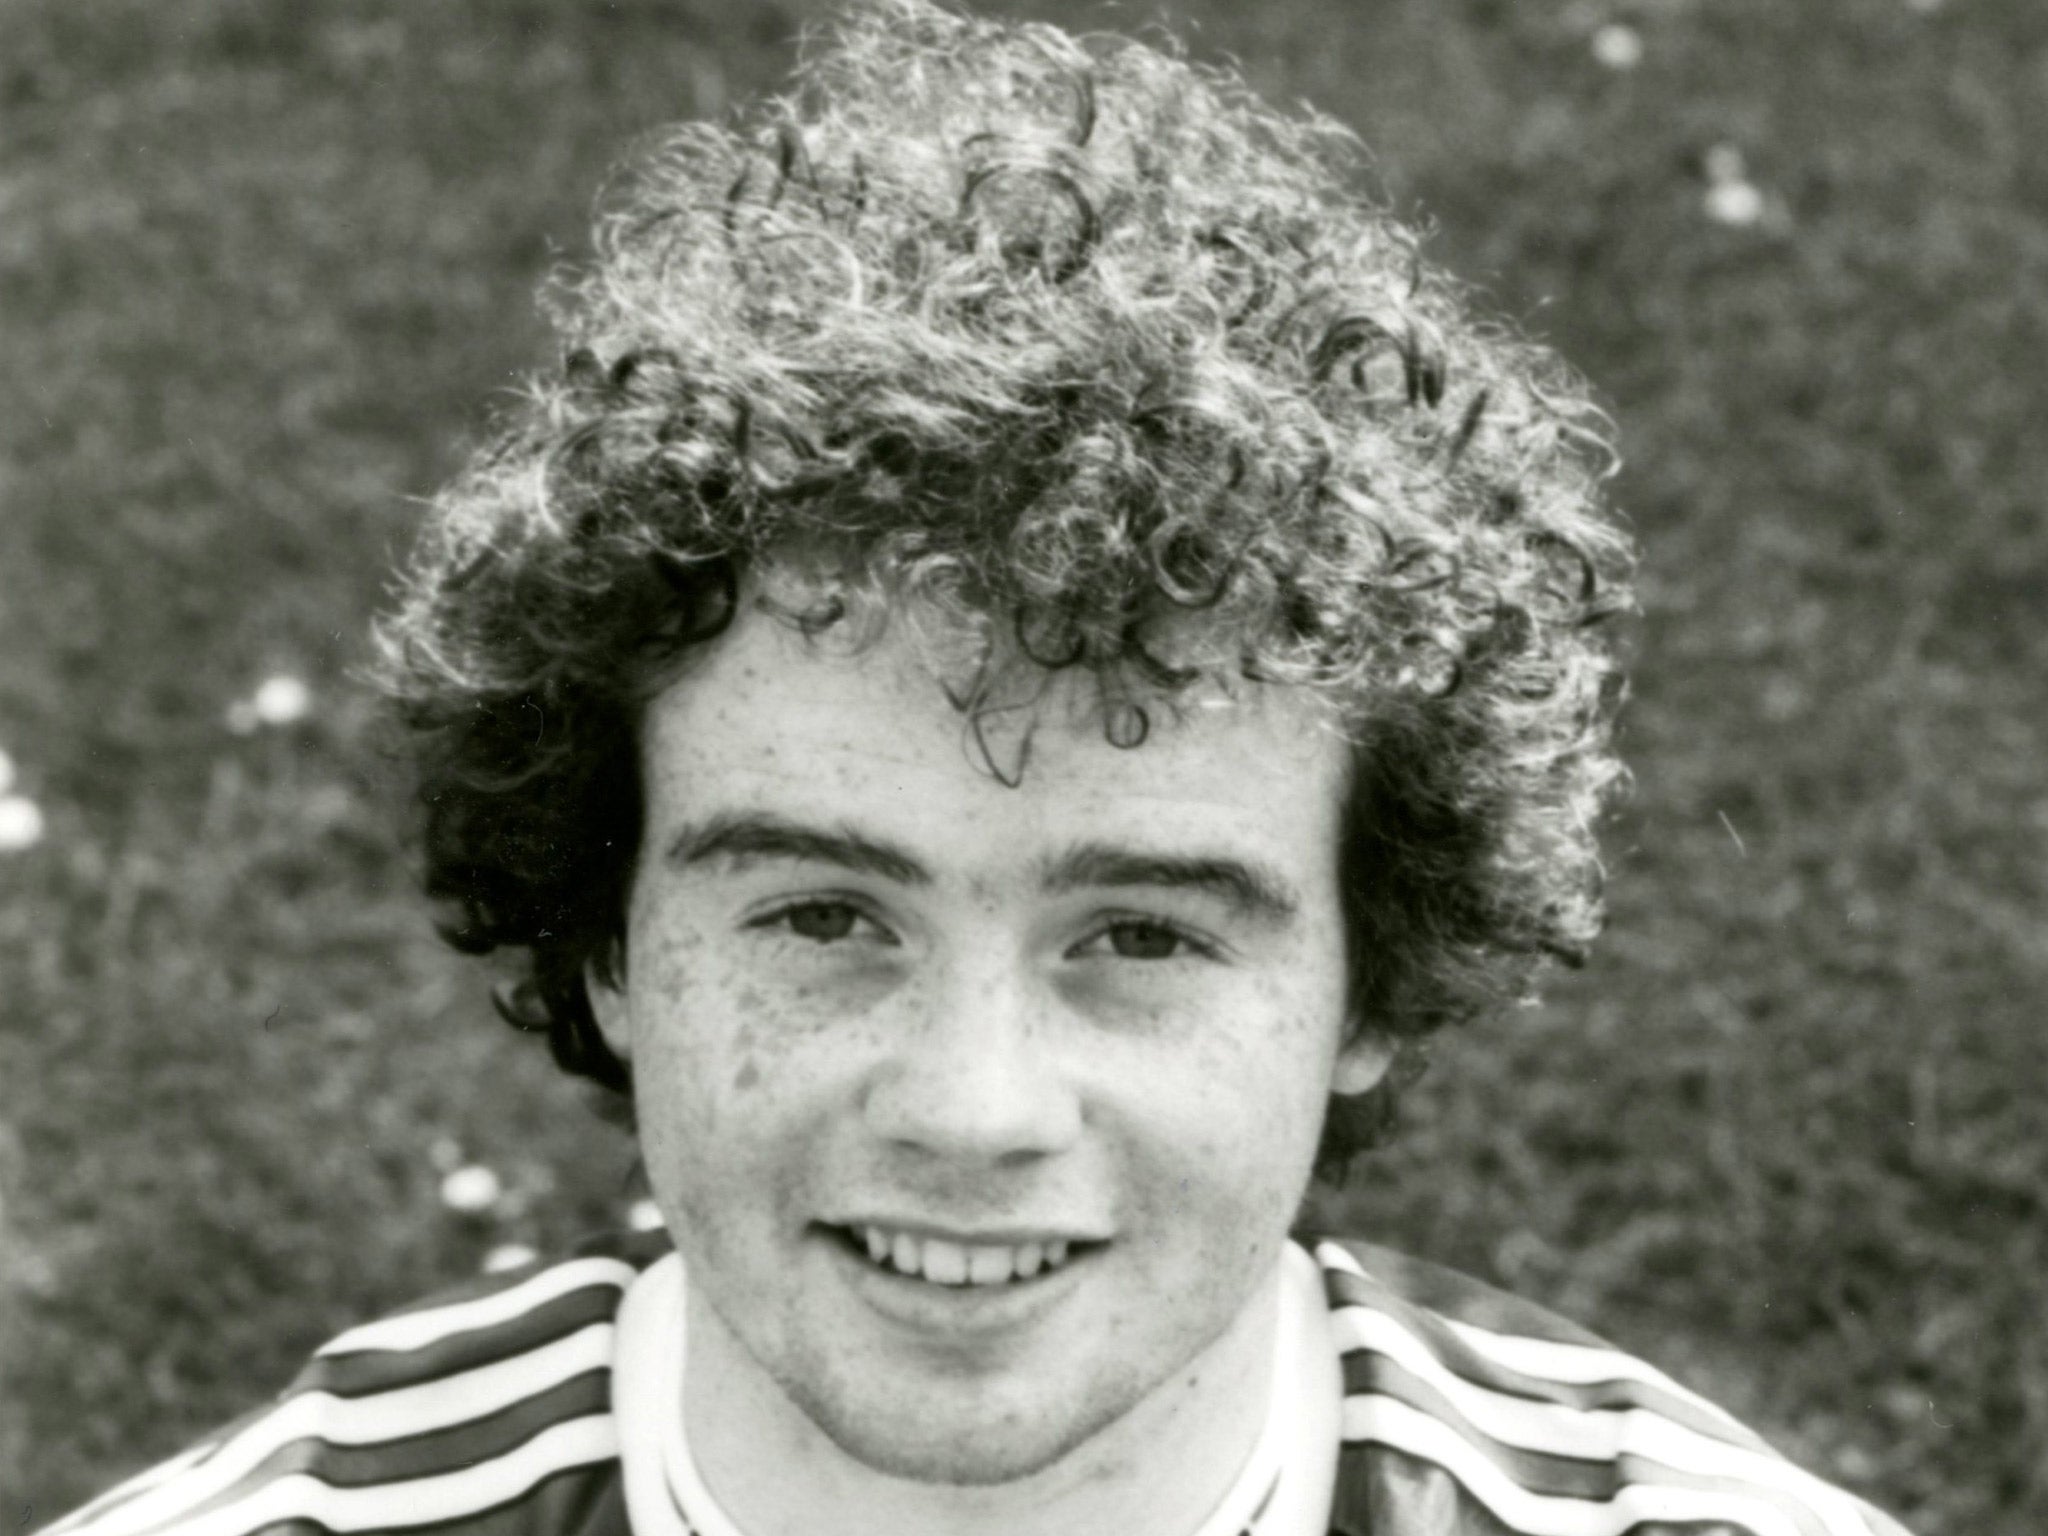 Former Manchester United player Adrian Doherty, pictured in 1990